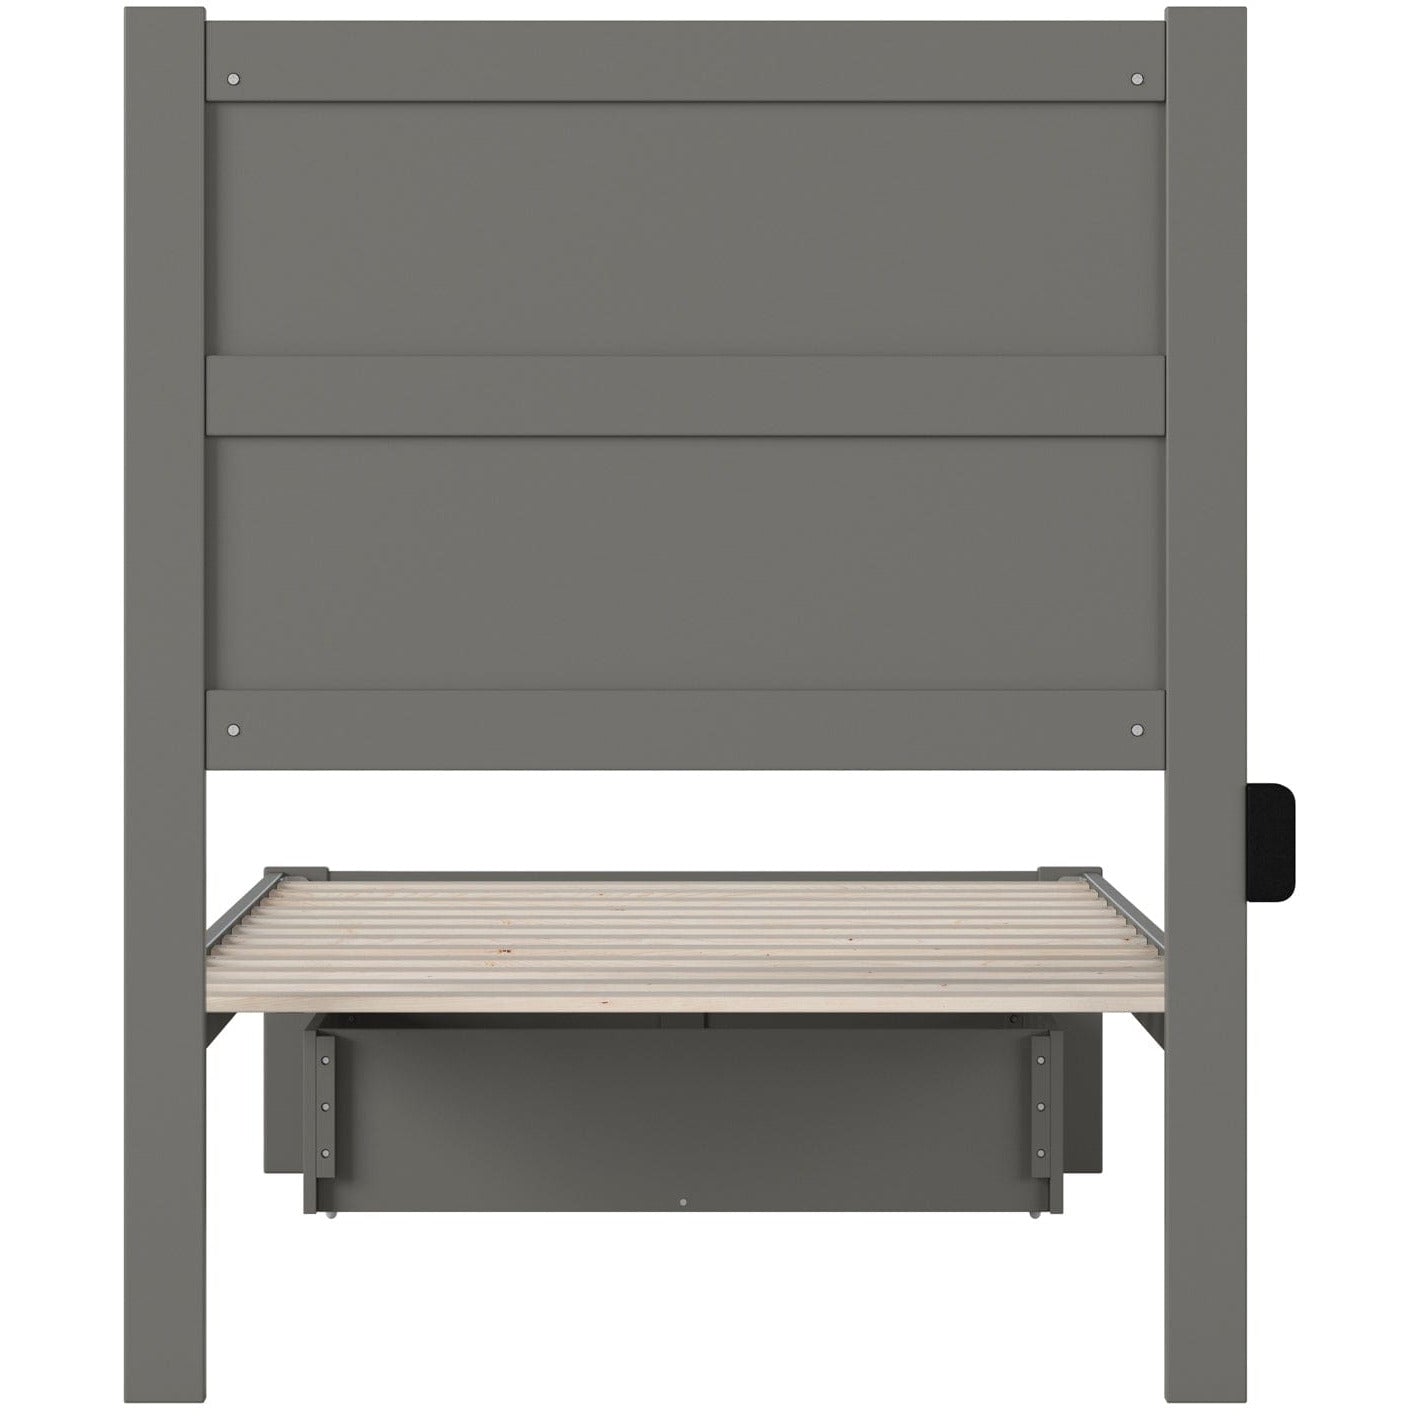 AFI Furnishings NoHo Twin Bed with Foot Drawer in Grey AG9112229